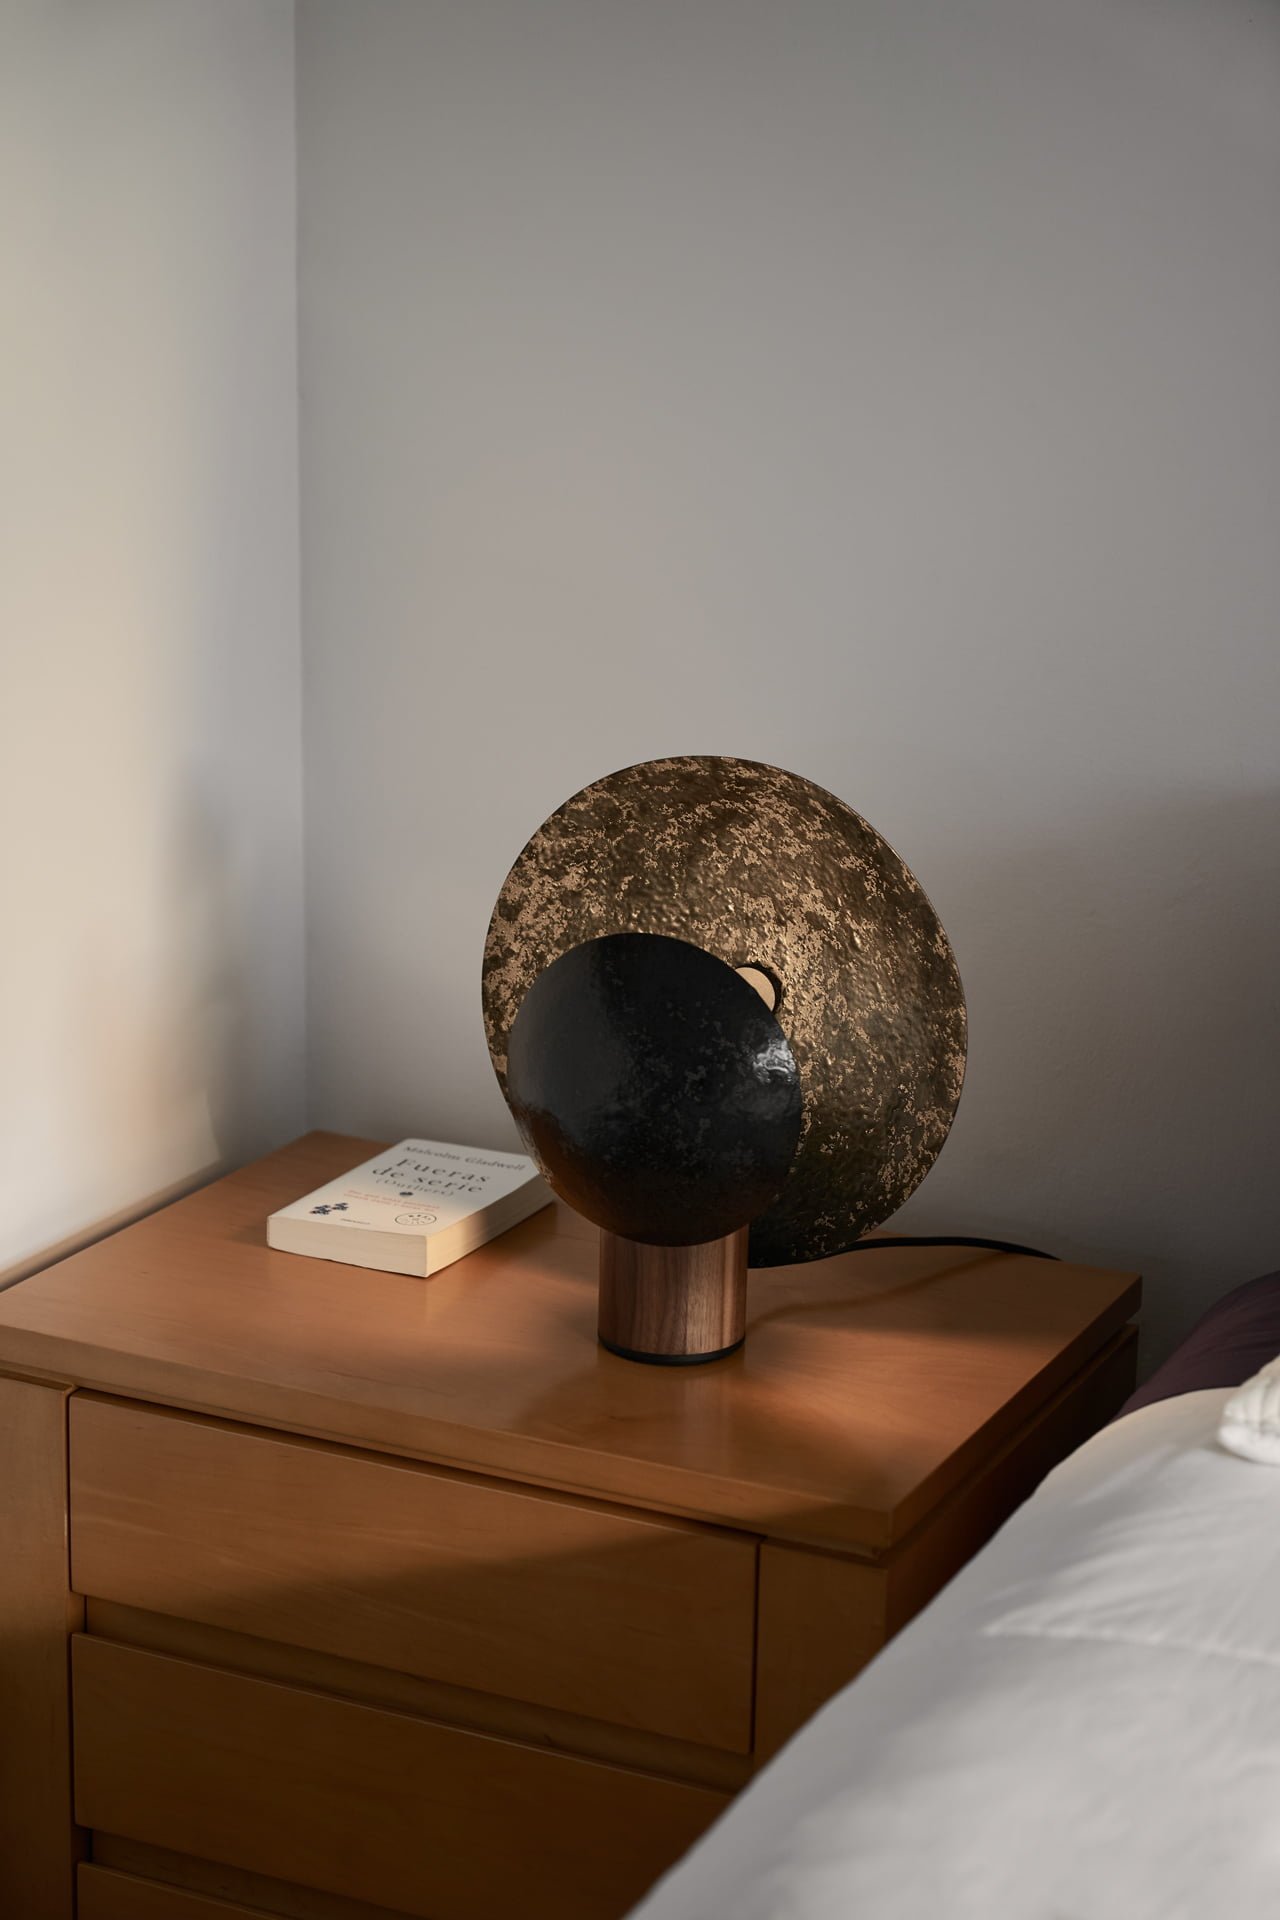 night table lamp for reading.